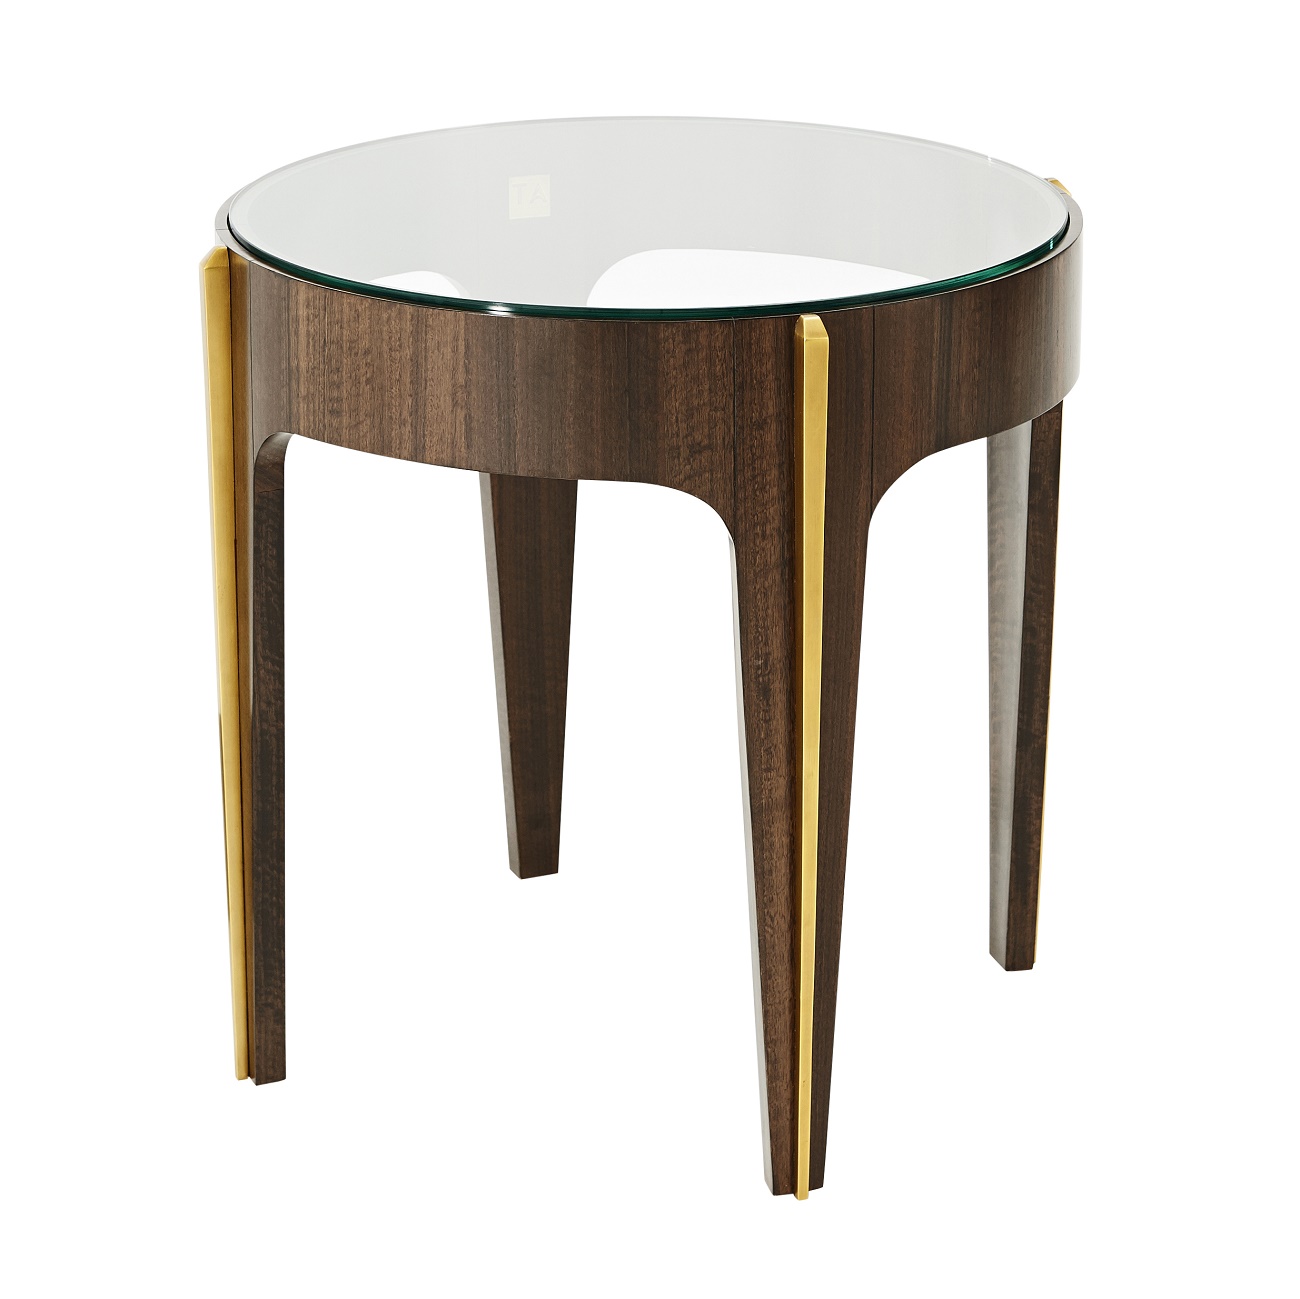 Theodore Alexander, Accent Lamp Table, Brooklyn, New York